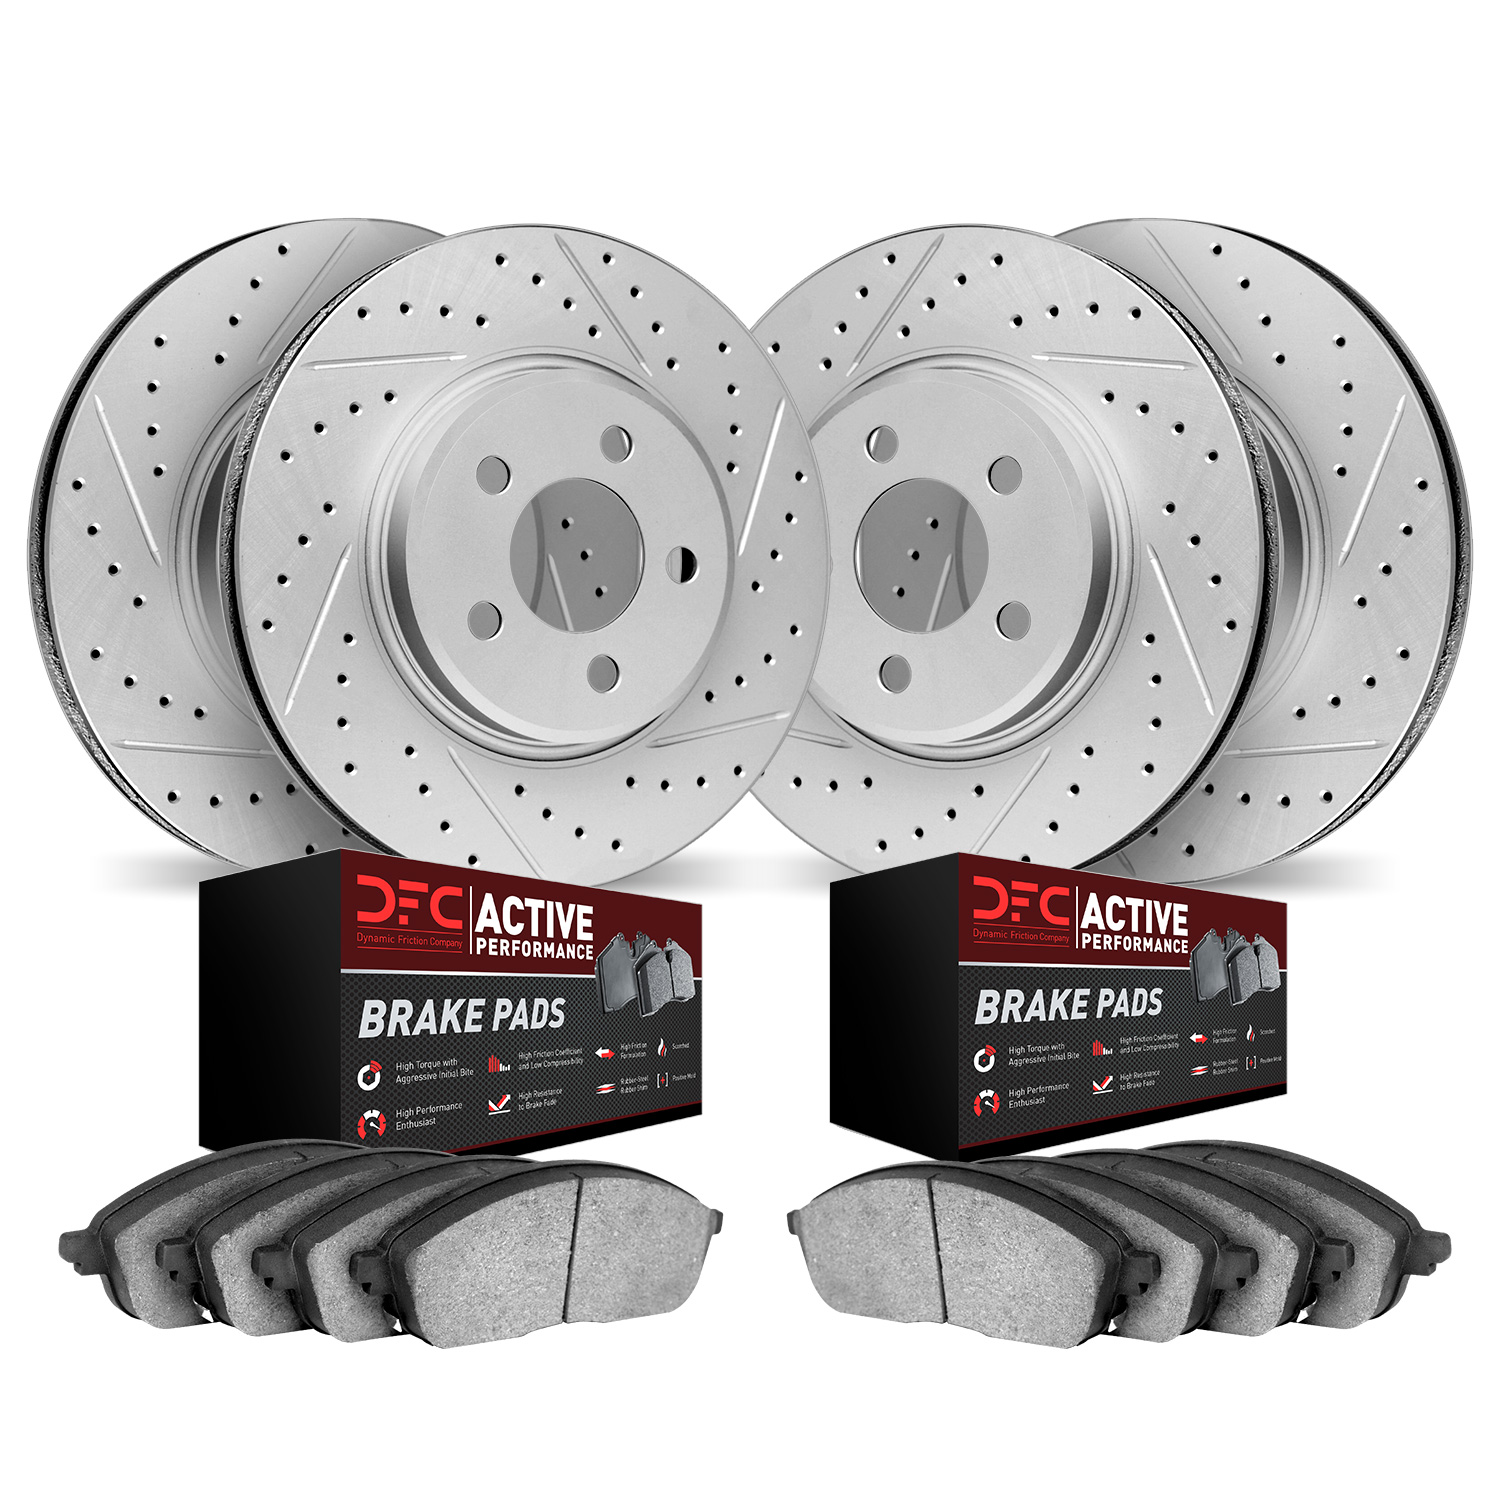 2704-31039 Geoperformance Drilled/Slotted Brake Rotors with Active Performance Pads Kit, 2003-2008 BMW, Position: Front and Rear